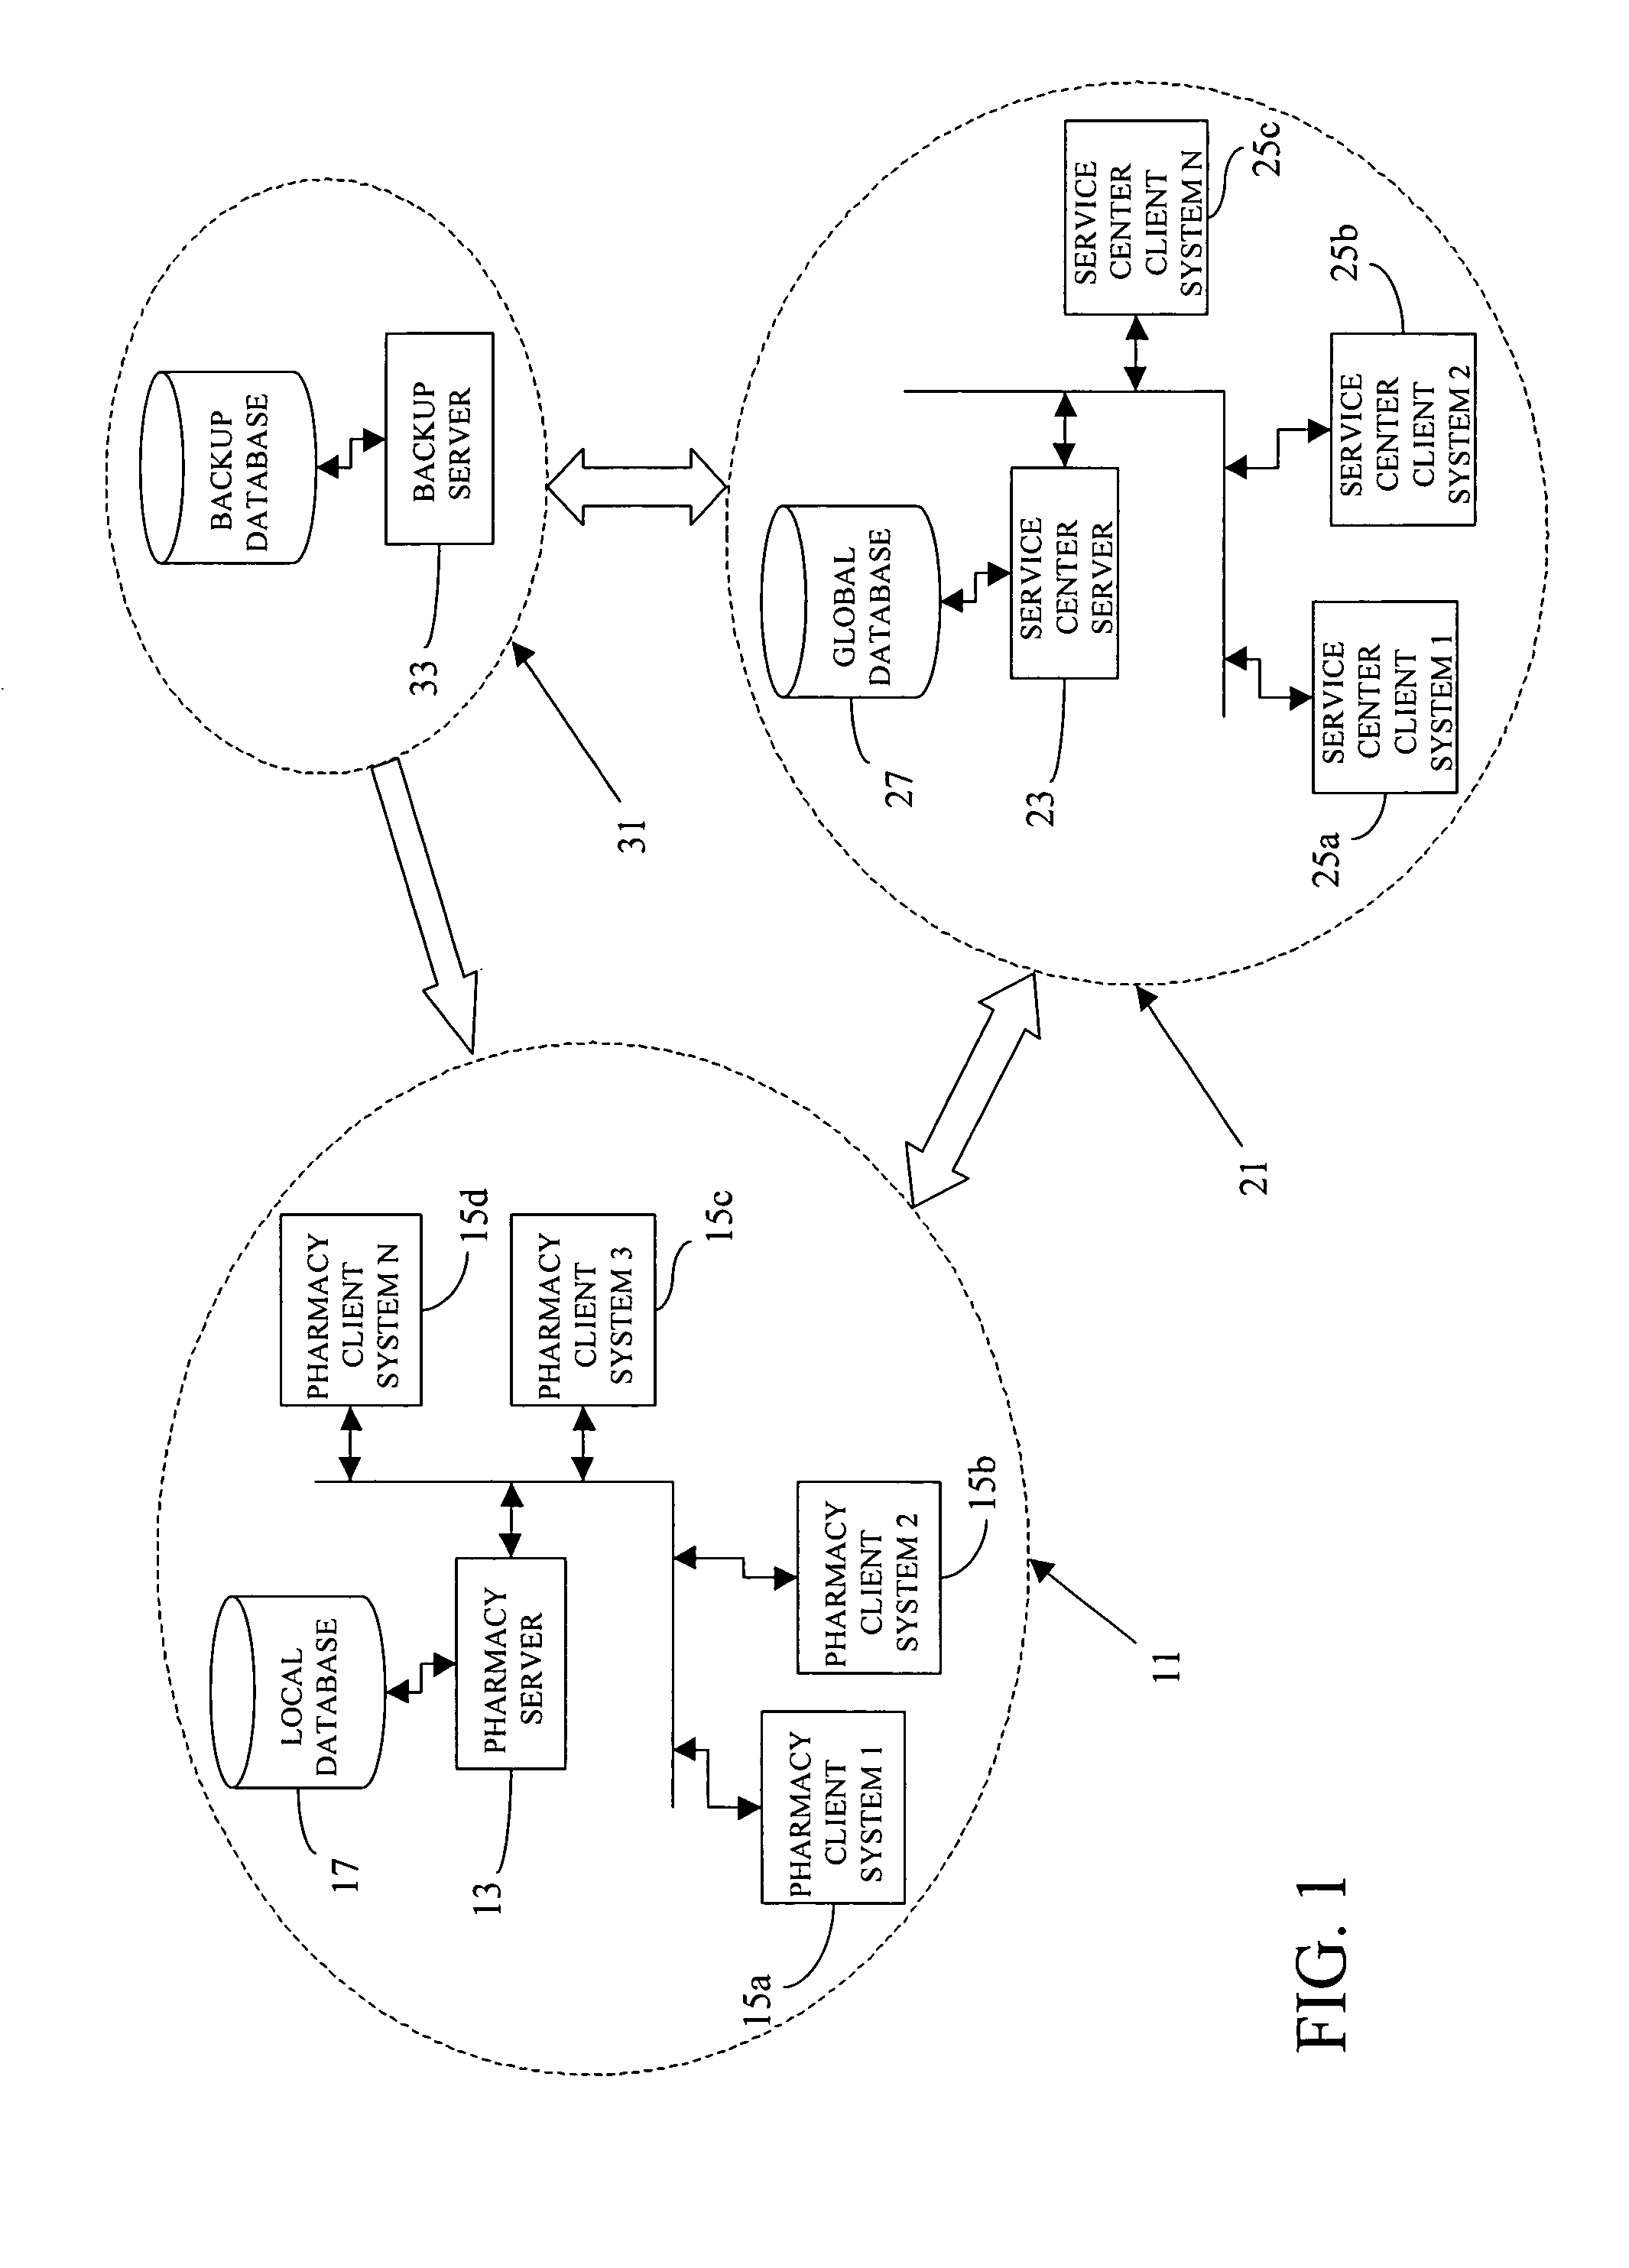 Pharmaceutical administrative system for ordering and receiving prescribed medication